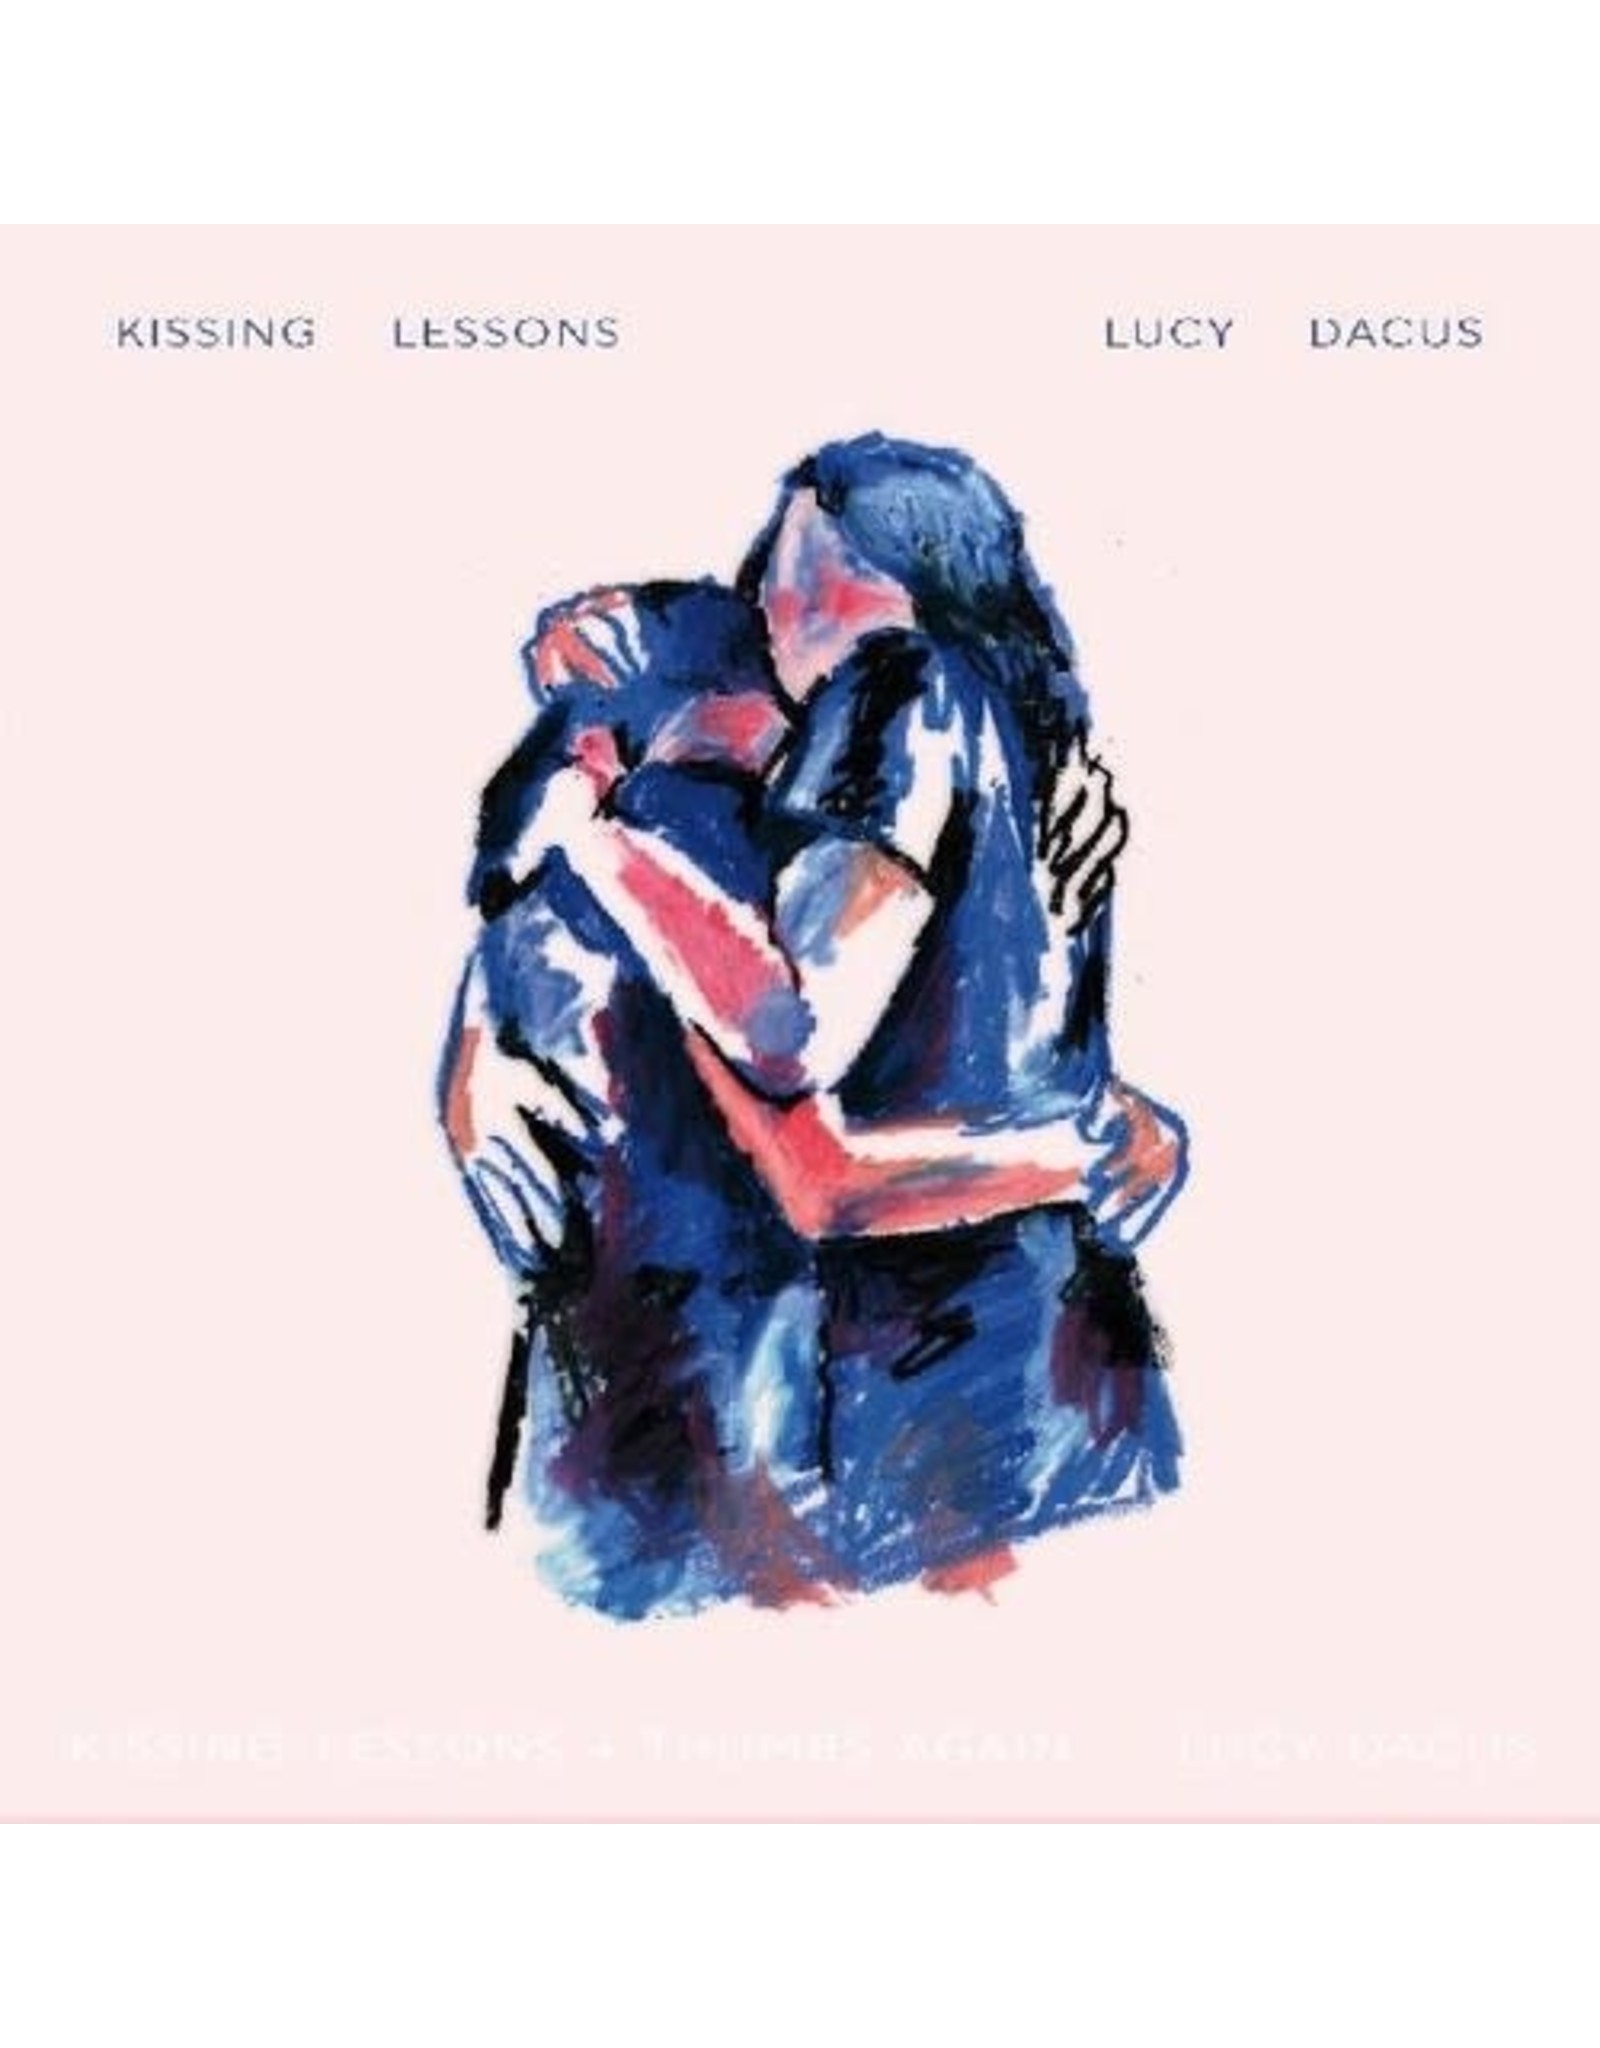 New Vinyl Lucy Dacus - Kissing Lessons / Thumbs Again 7"